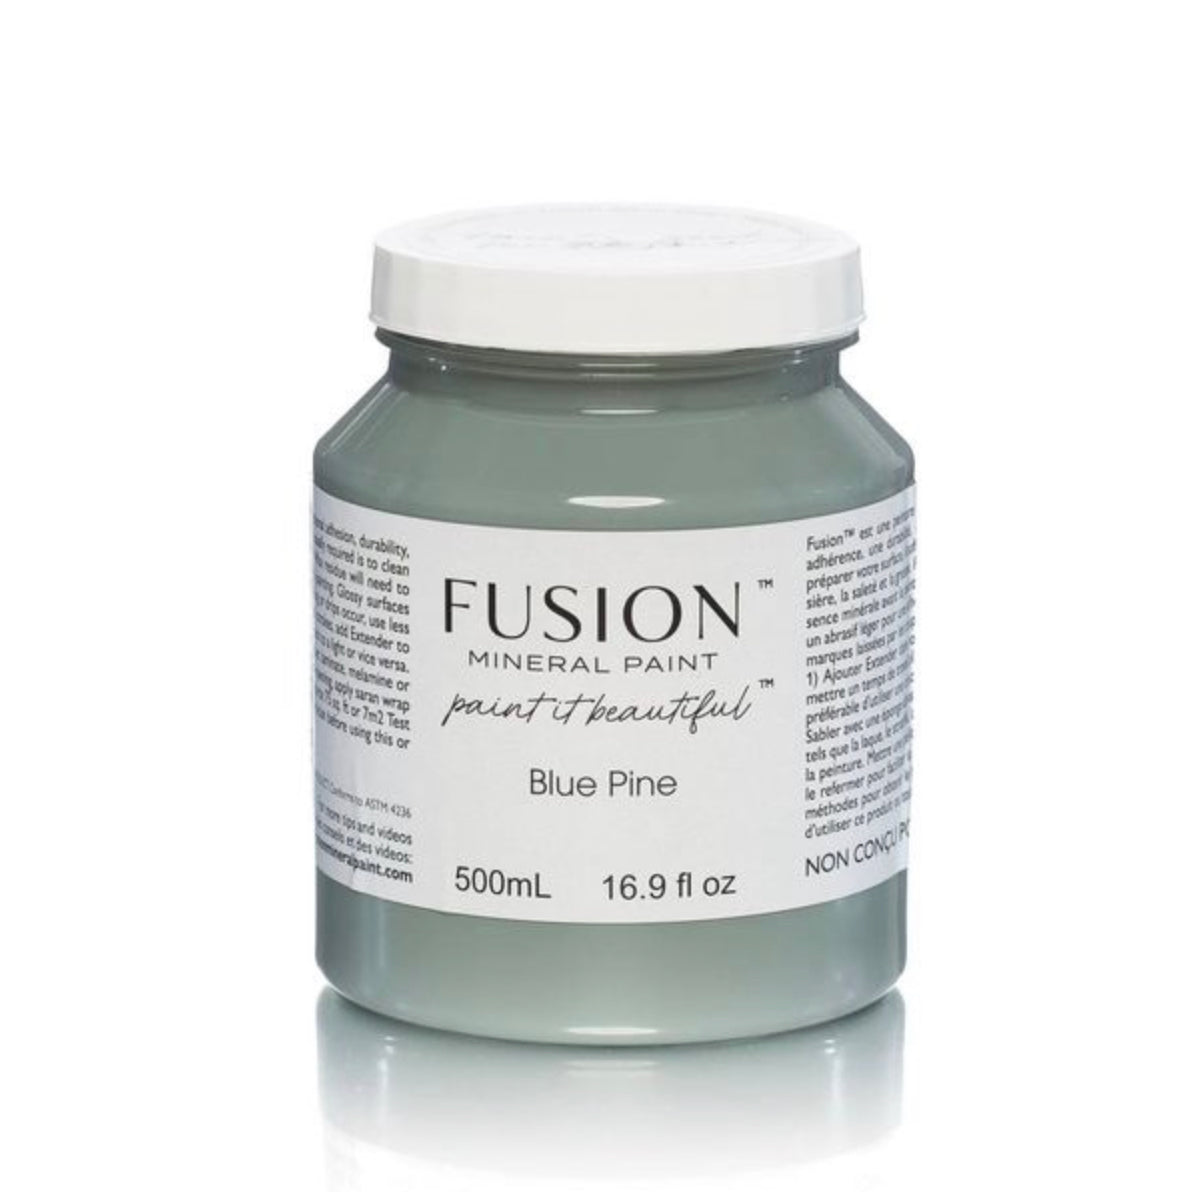 Fusion Mineral Paint - Blue Pine New Release 2021!